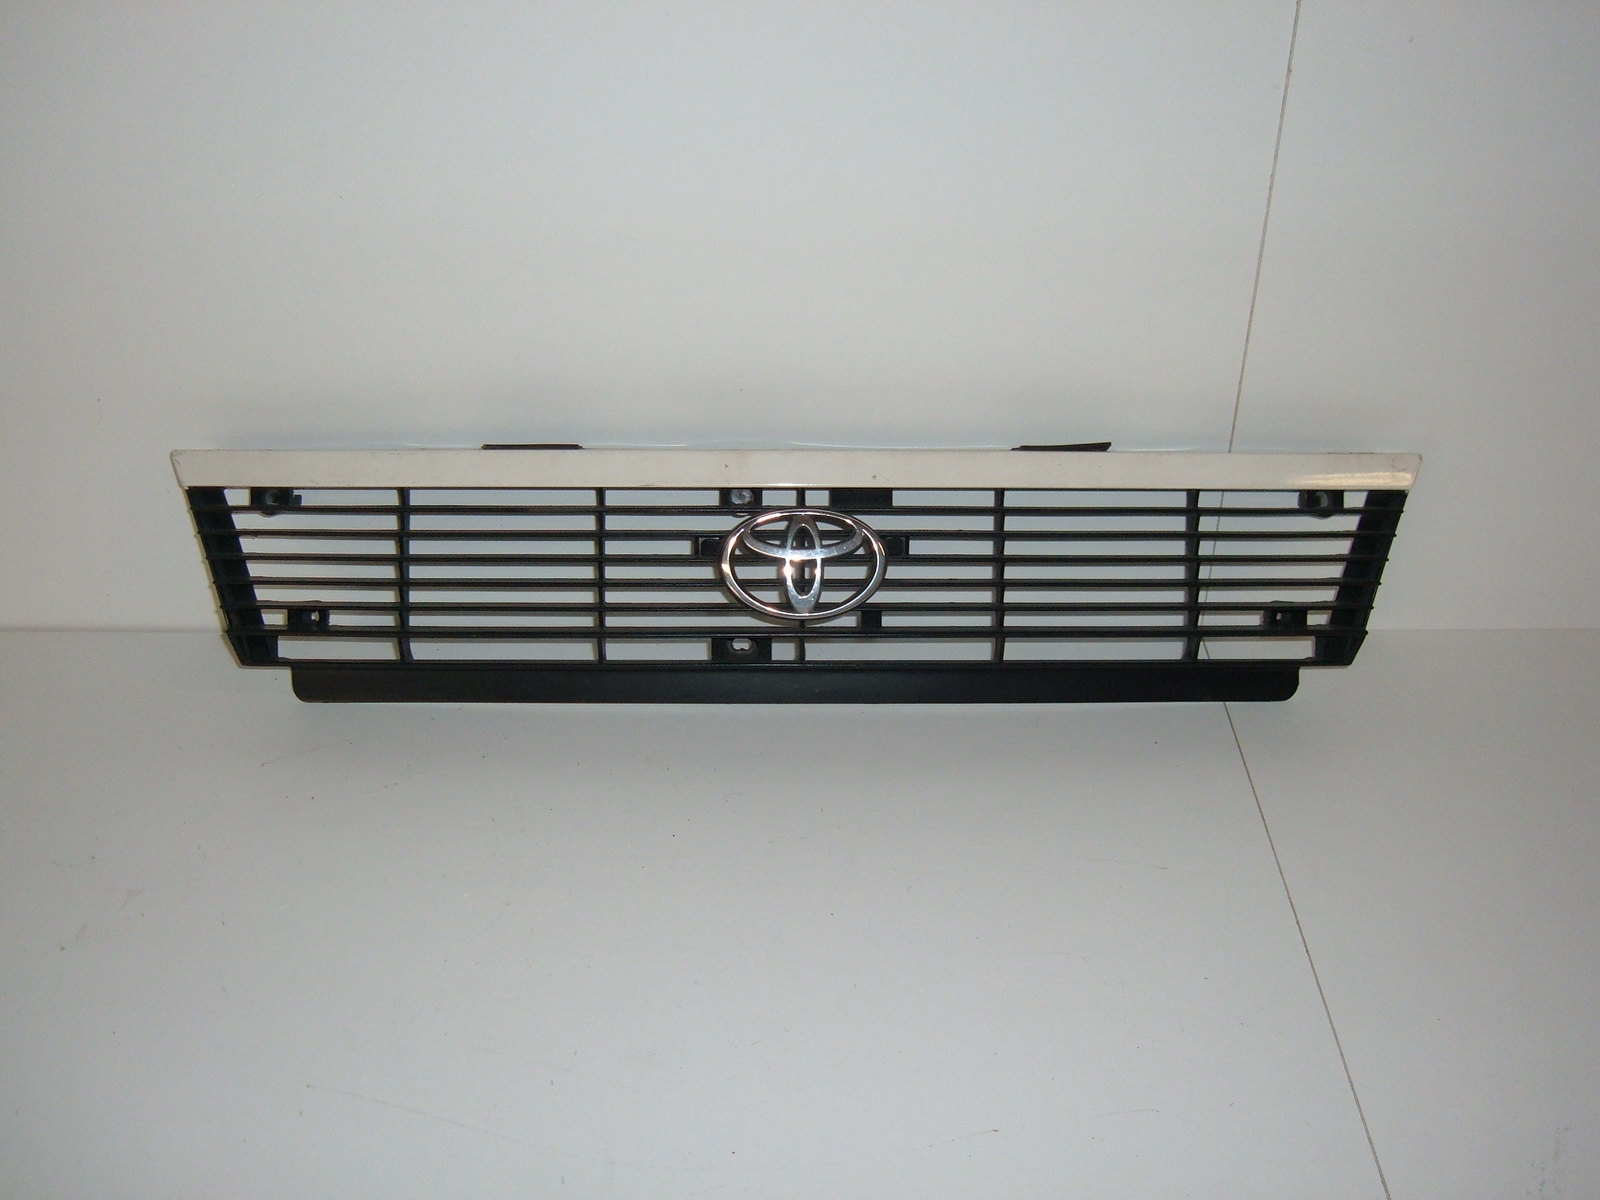 Primary image for 1987 Toyota Camry factory OEM front grille.